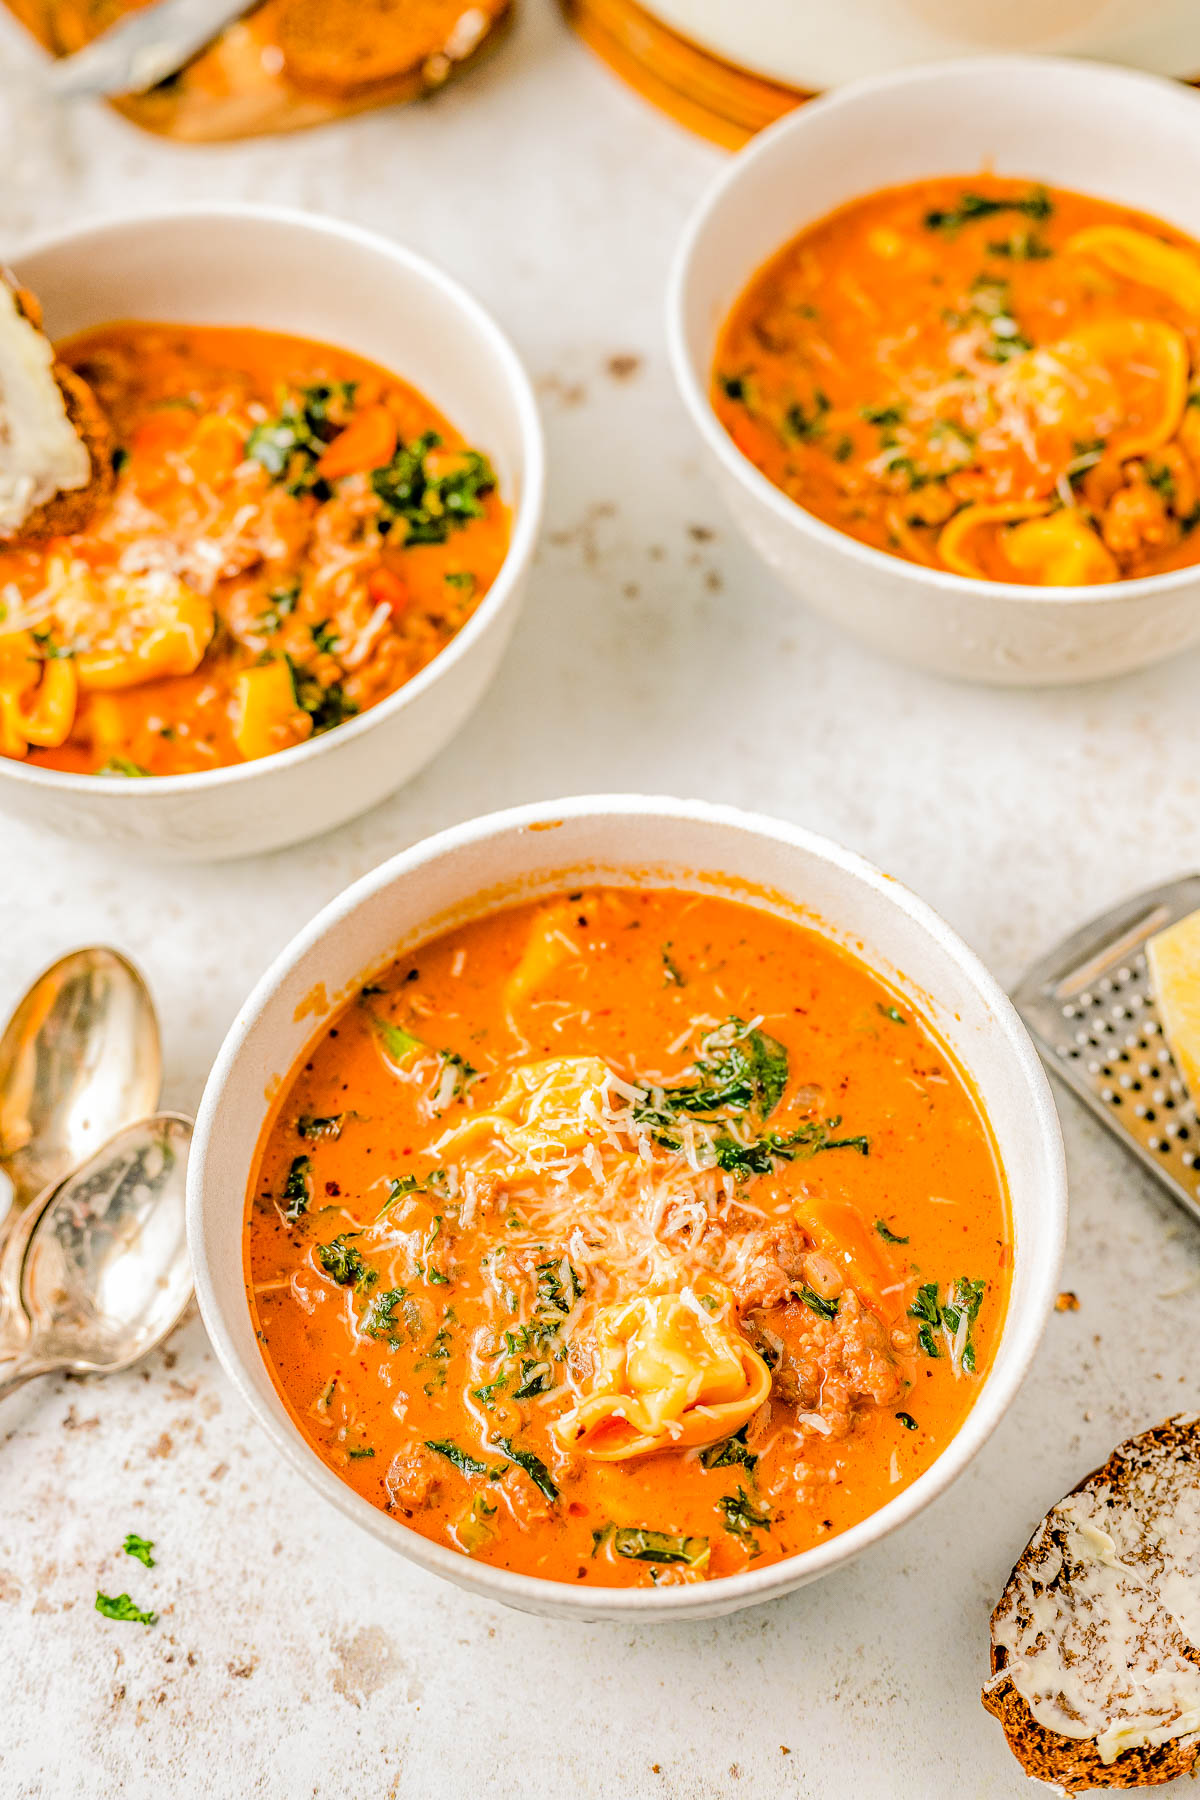 Sausage Tortellini Soup - Indulge in the warmth and coziness of this EASY Italian sausage tortellini soup that's made in one pot and ready in 30 MINUTES! Made with cheesy tortellini, juicy sausage, carrots and kale for extra nutrients, and a rich and creamy tomato sauce broth! This comfort food soup recipe is perfect for chilly weather and you can make it on busy weeknights because it's so QUICK!